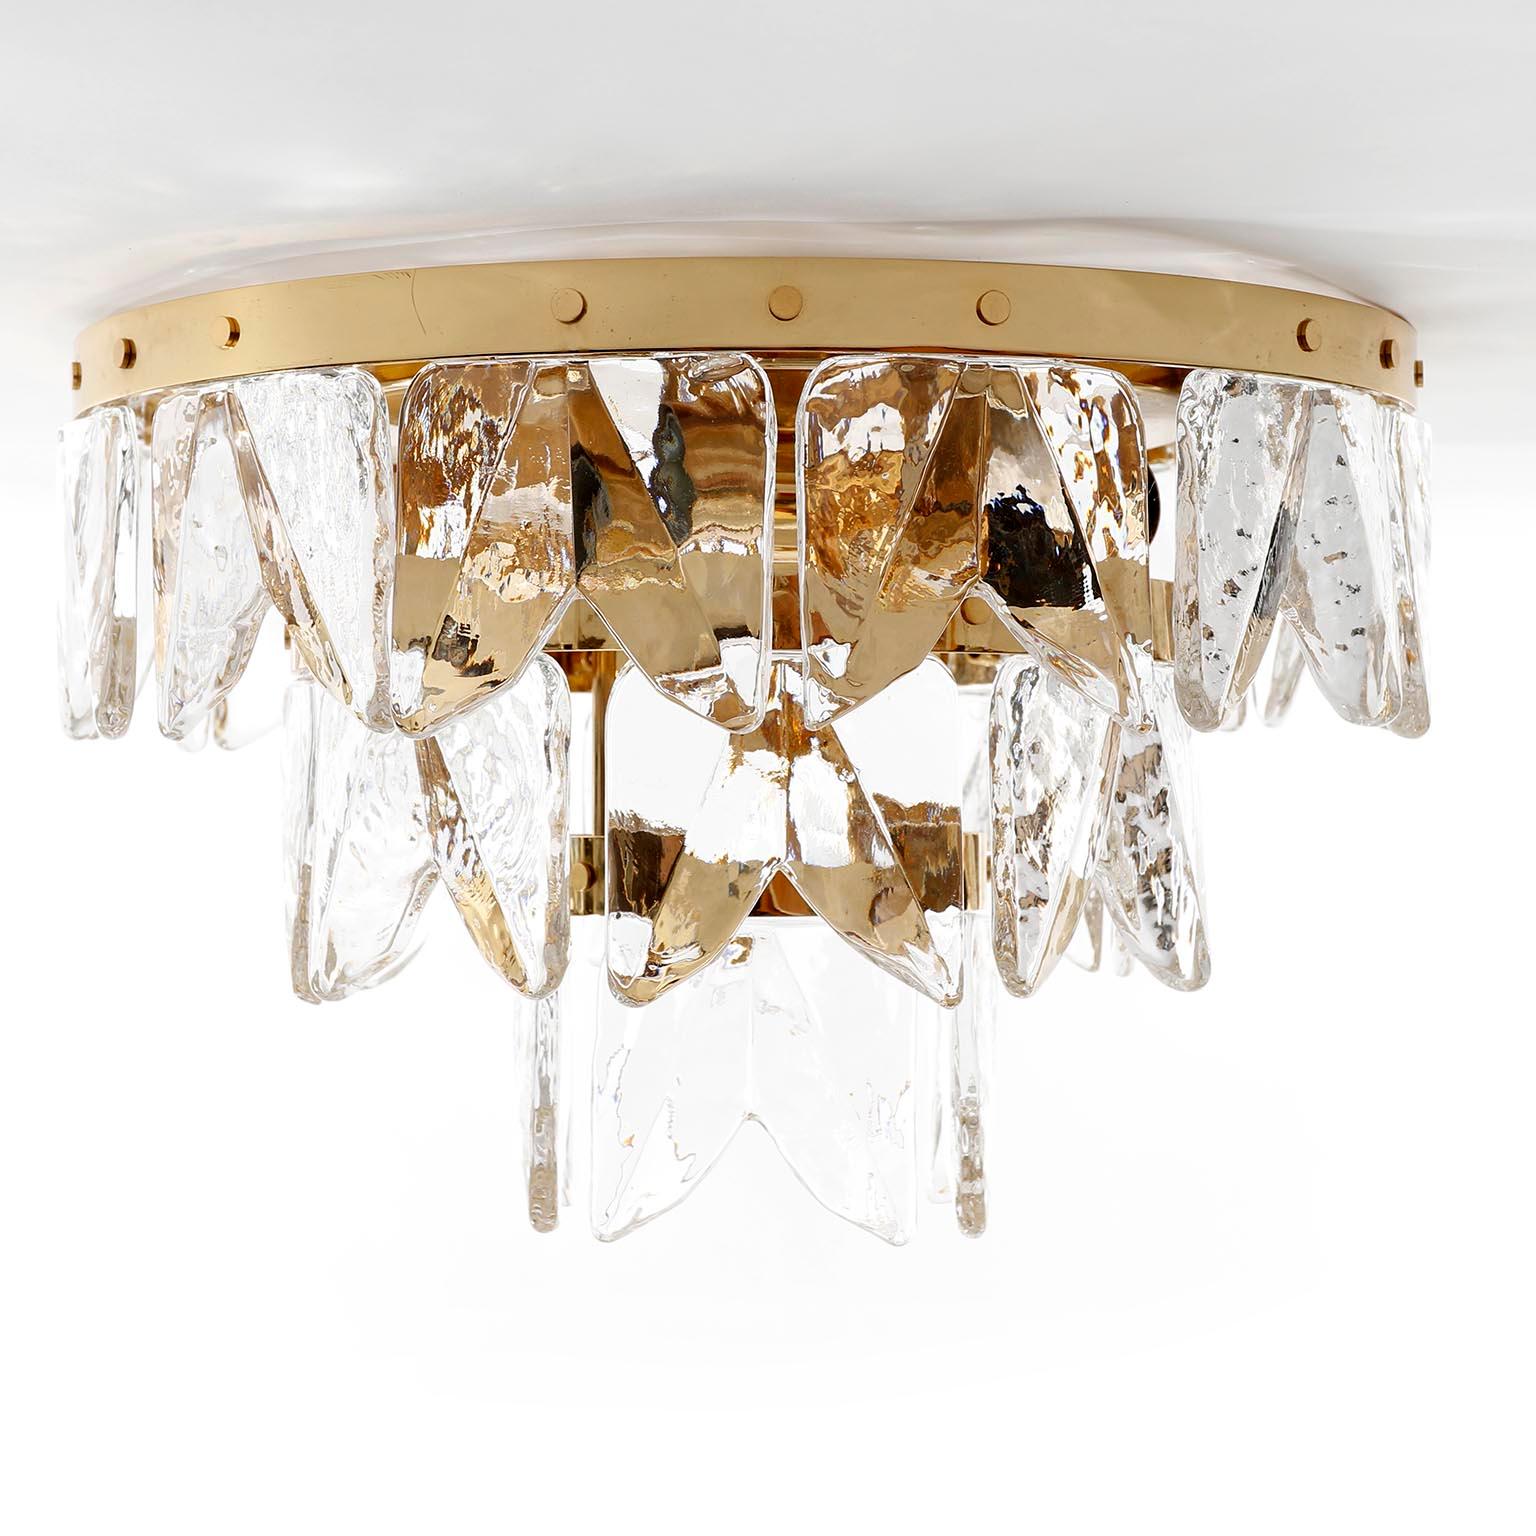 A very exclusive Hollywood regency ice glass flush mount light model 'Corina' by J.T. Kalmar, Vienna, Austria, manufactured in midcentury, circa 1970 (late 1960s or early 1970s).
A high quality item which is made of a 24-carat gilded polished brass